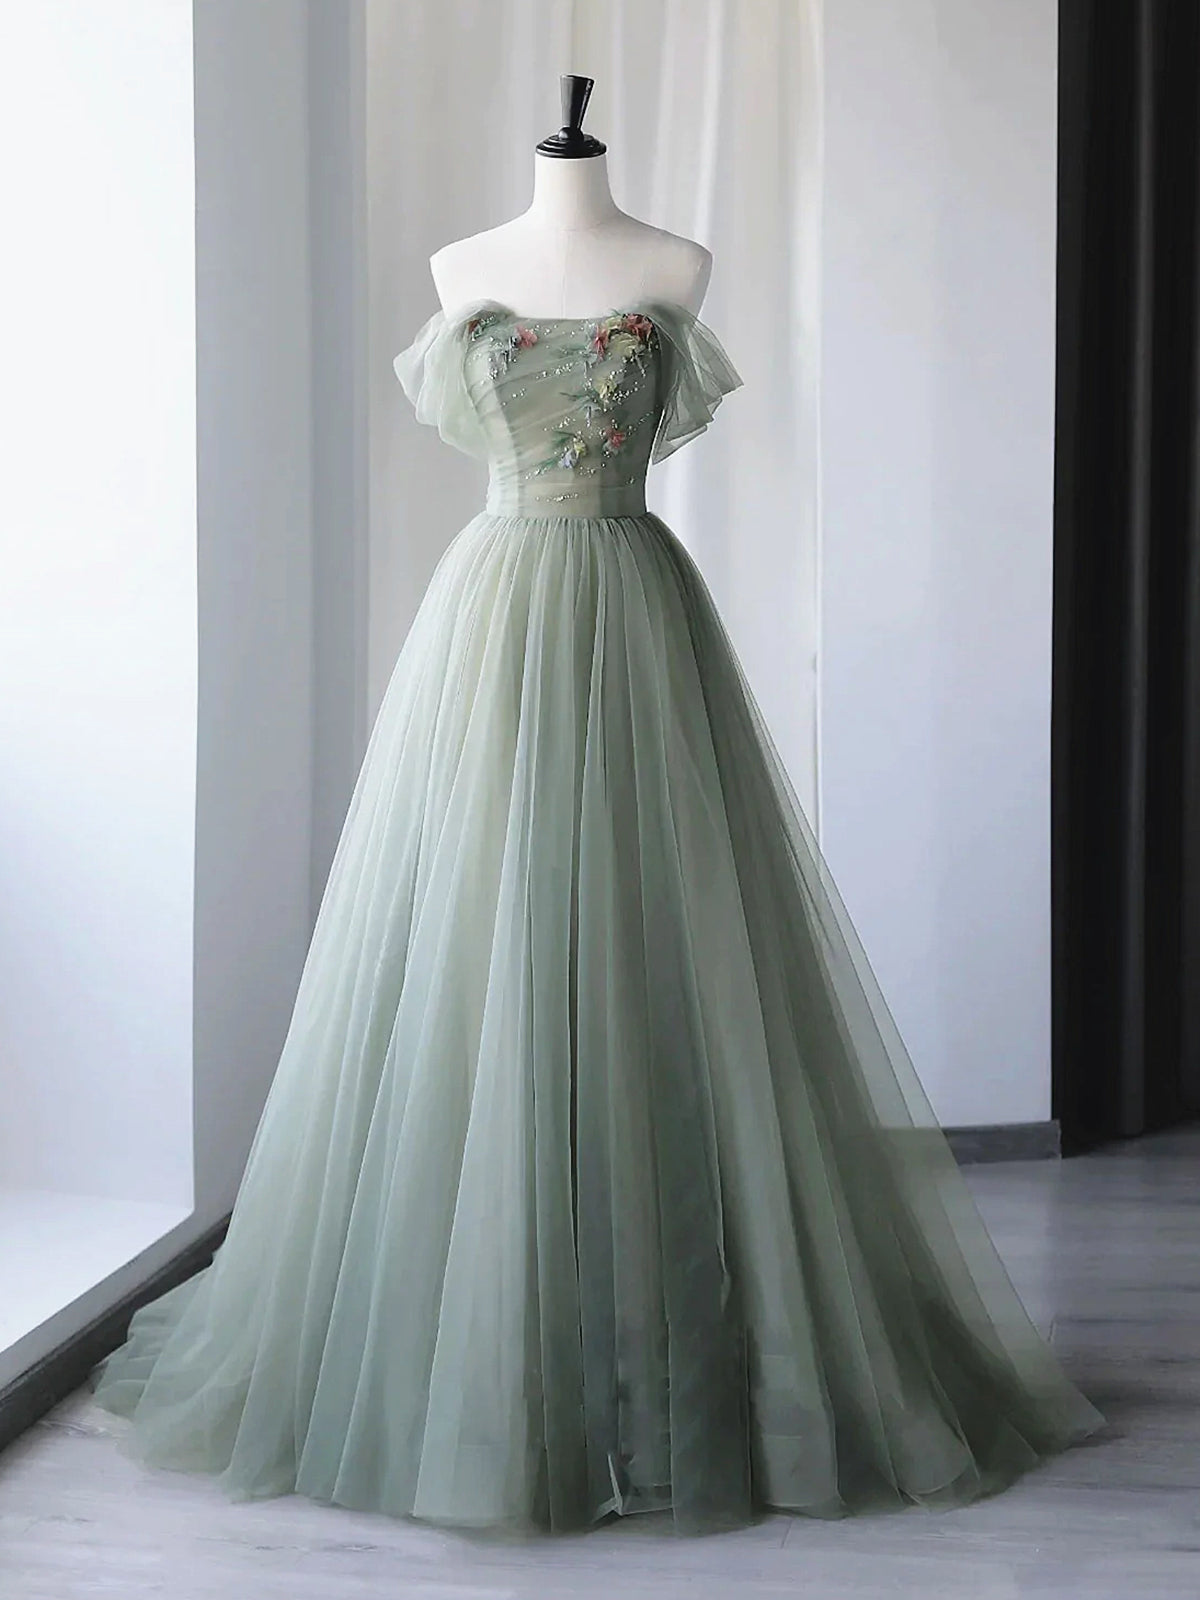 Off the Shoulder Green Floral Long Corset Prom Dresses, Green Floral Long Corset Formal Evening Dresses outfit, Party Dress Websites